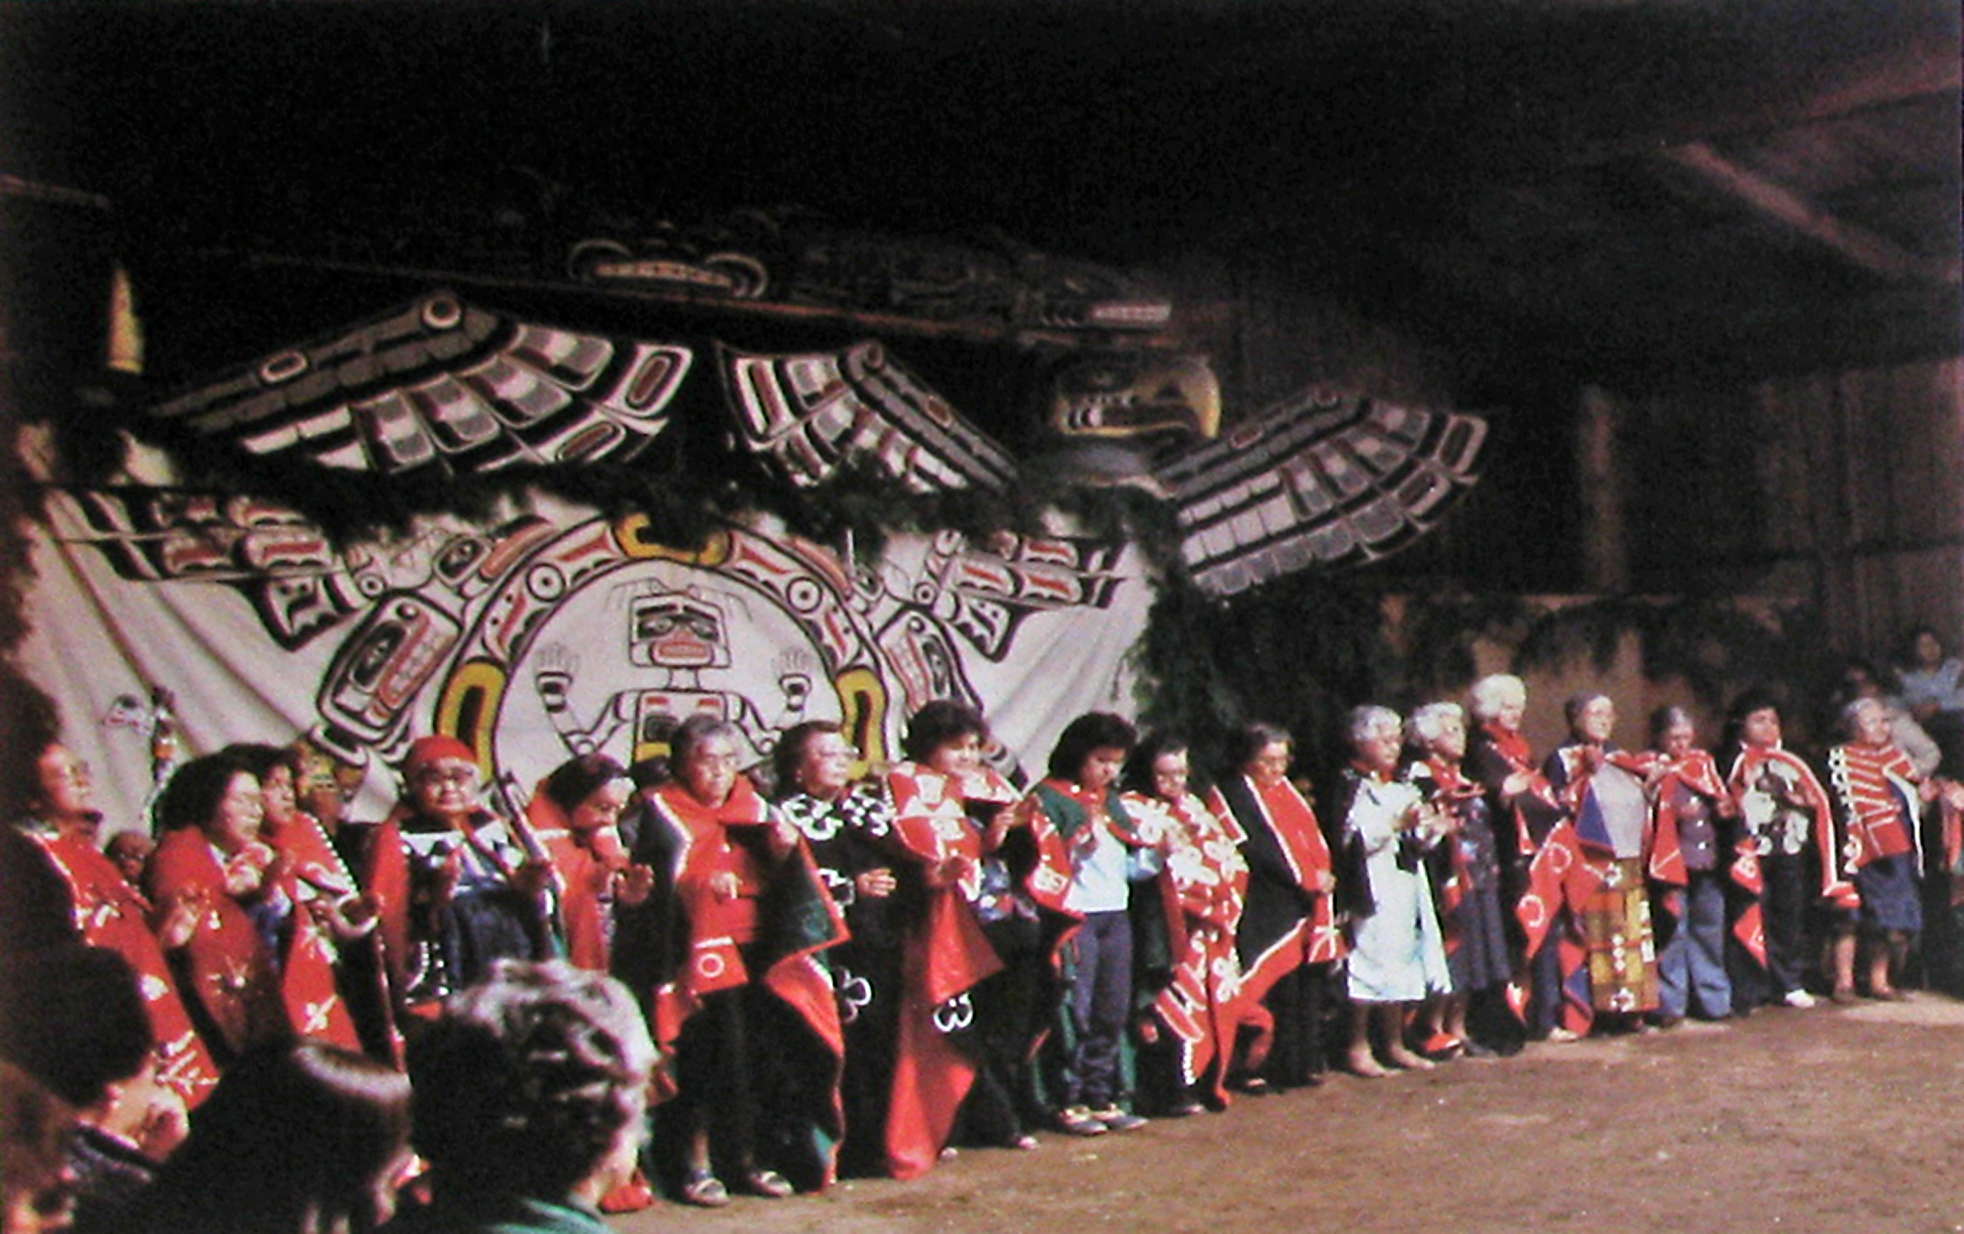 The Potlatch First Nations of the Pacific Northwest